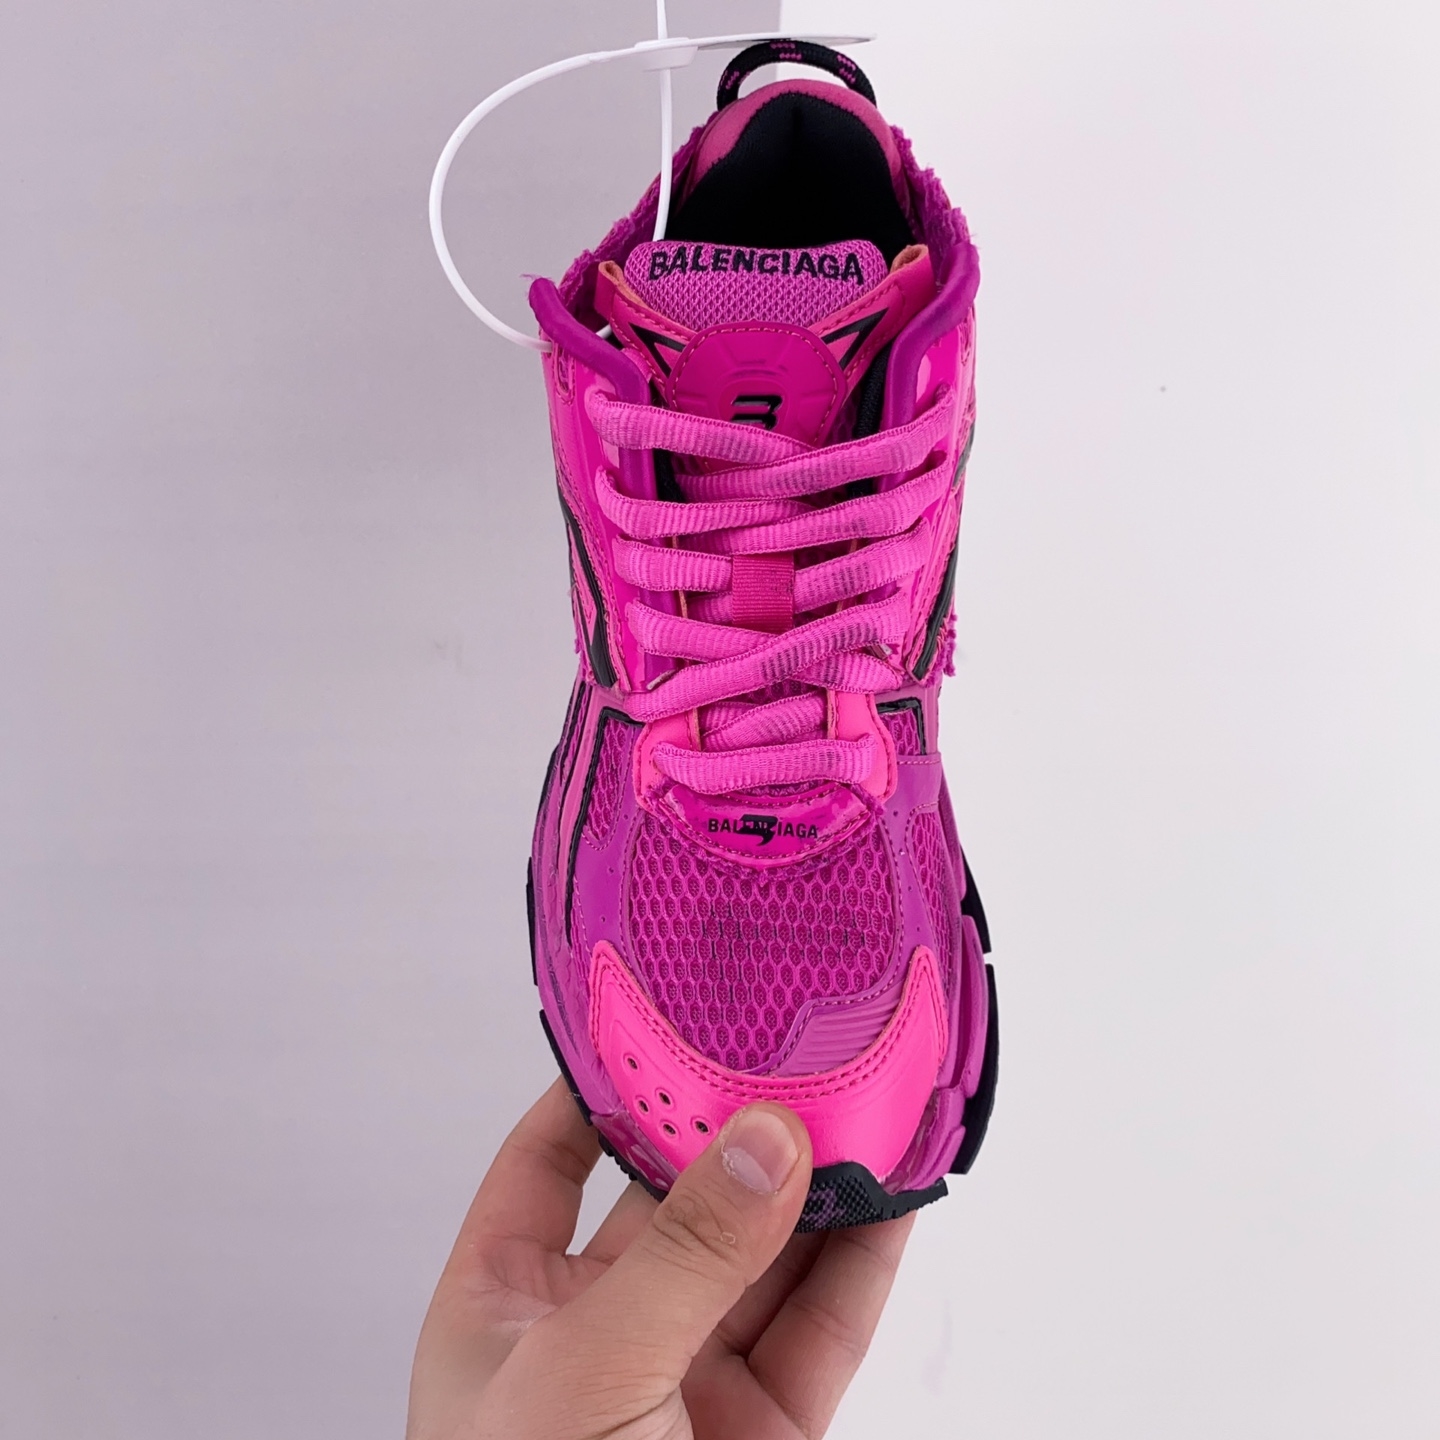 Balenciaga Wmns Runner Sneaker 'Dark Pink' 677402 W3RB2 5510 - Stylish and Comfortable Running Shoes